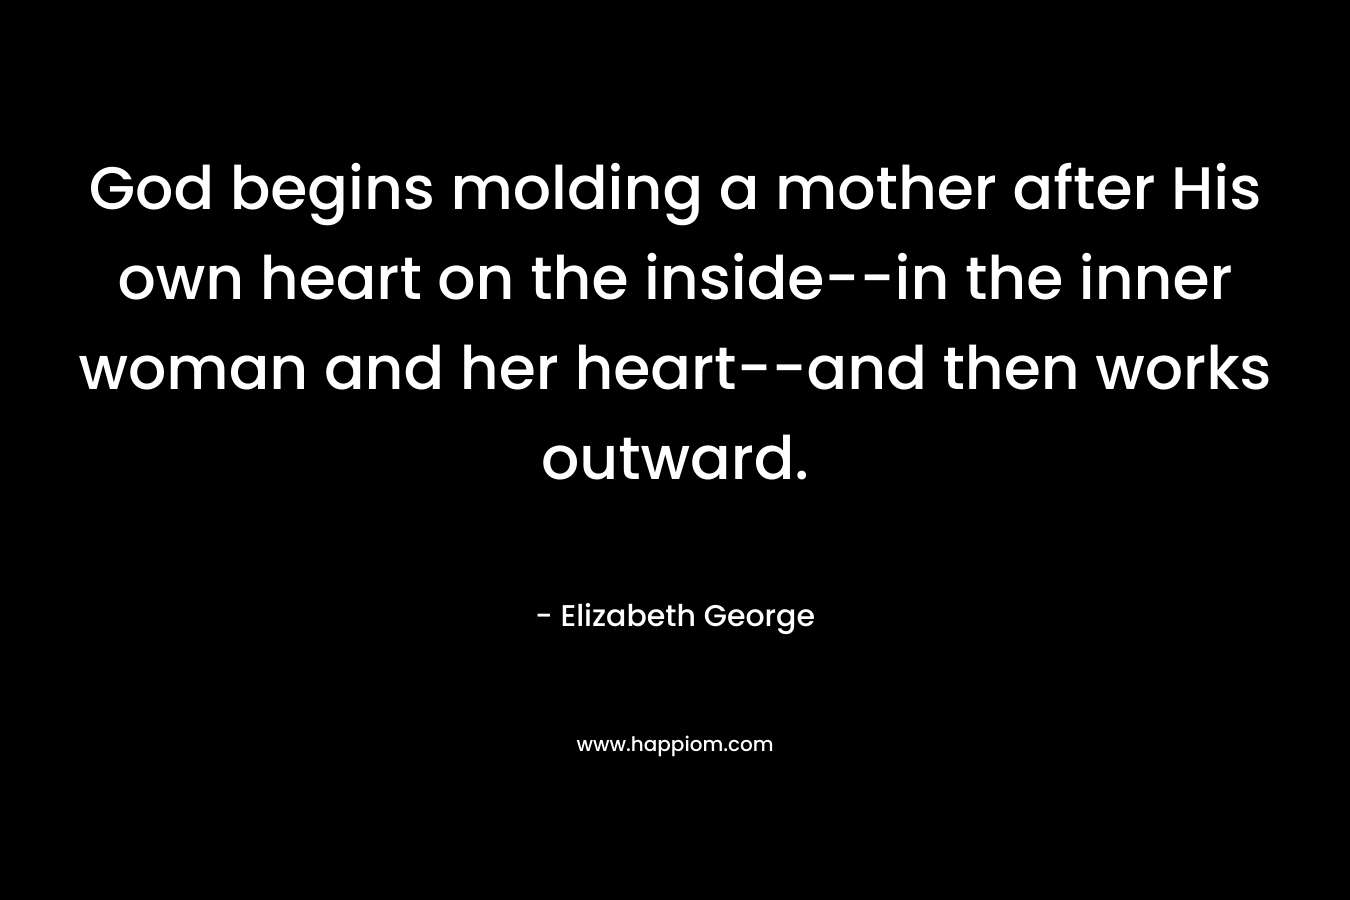 God begins molding a mother after His own heart on the inside--in the inner woman and her heart--and then works outward.